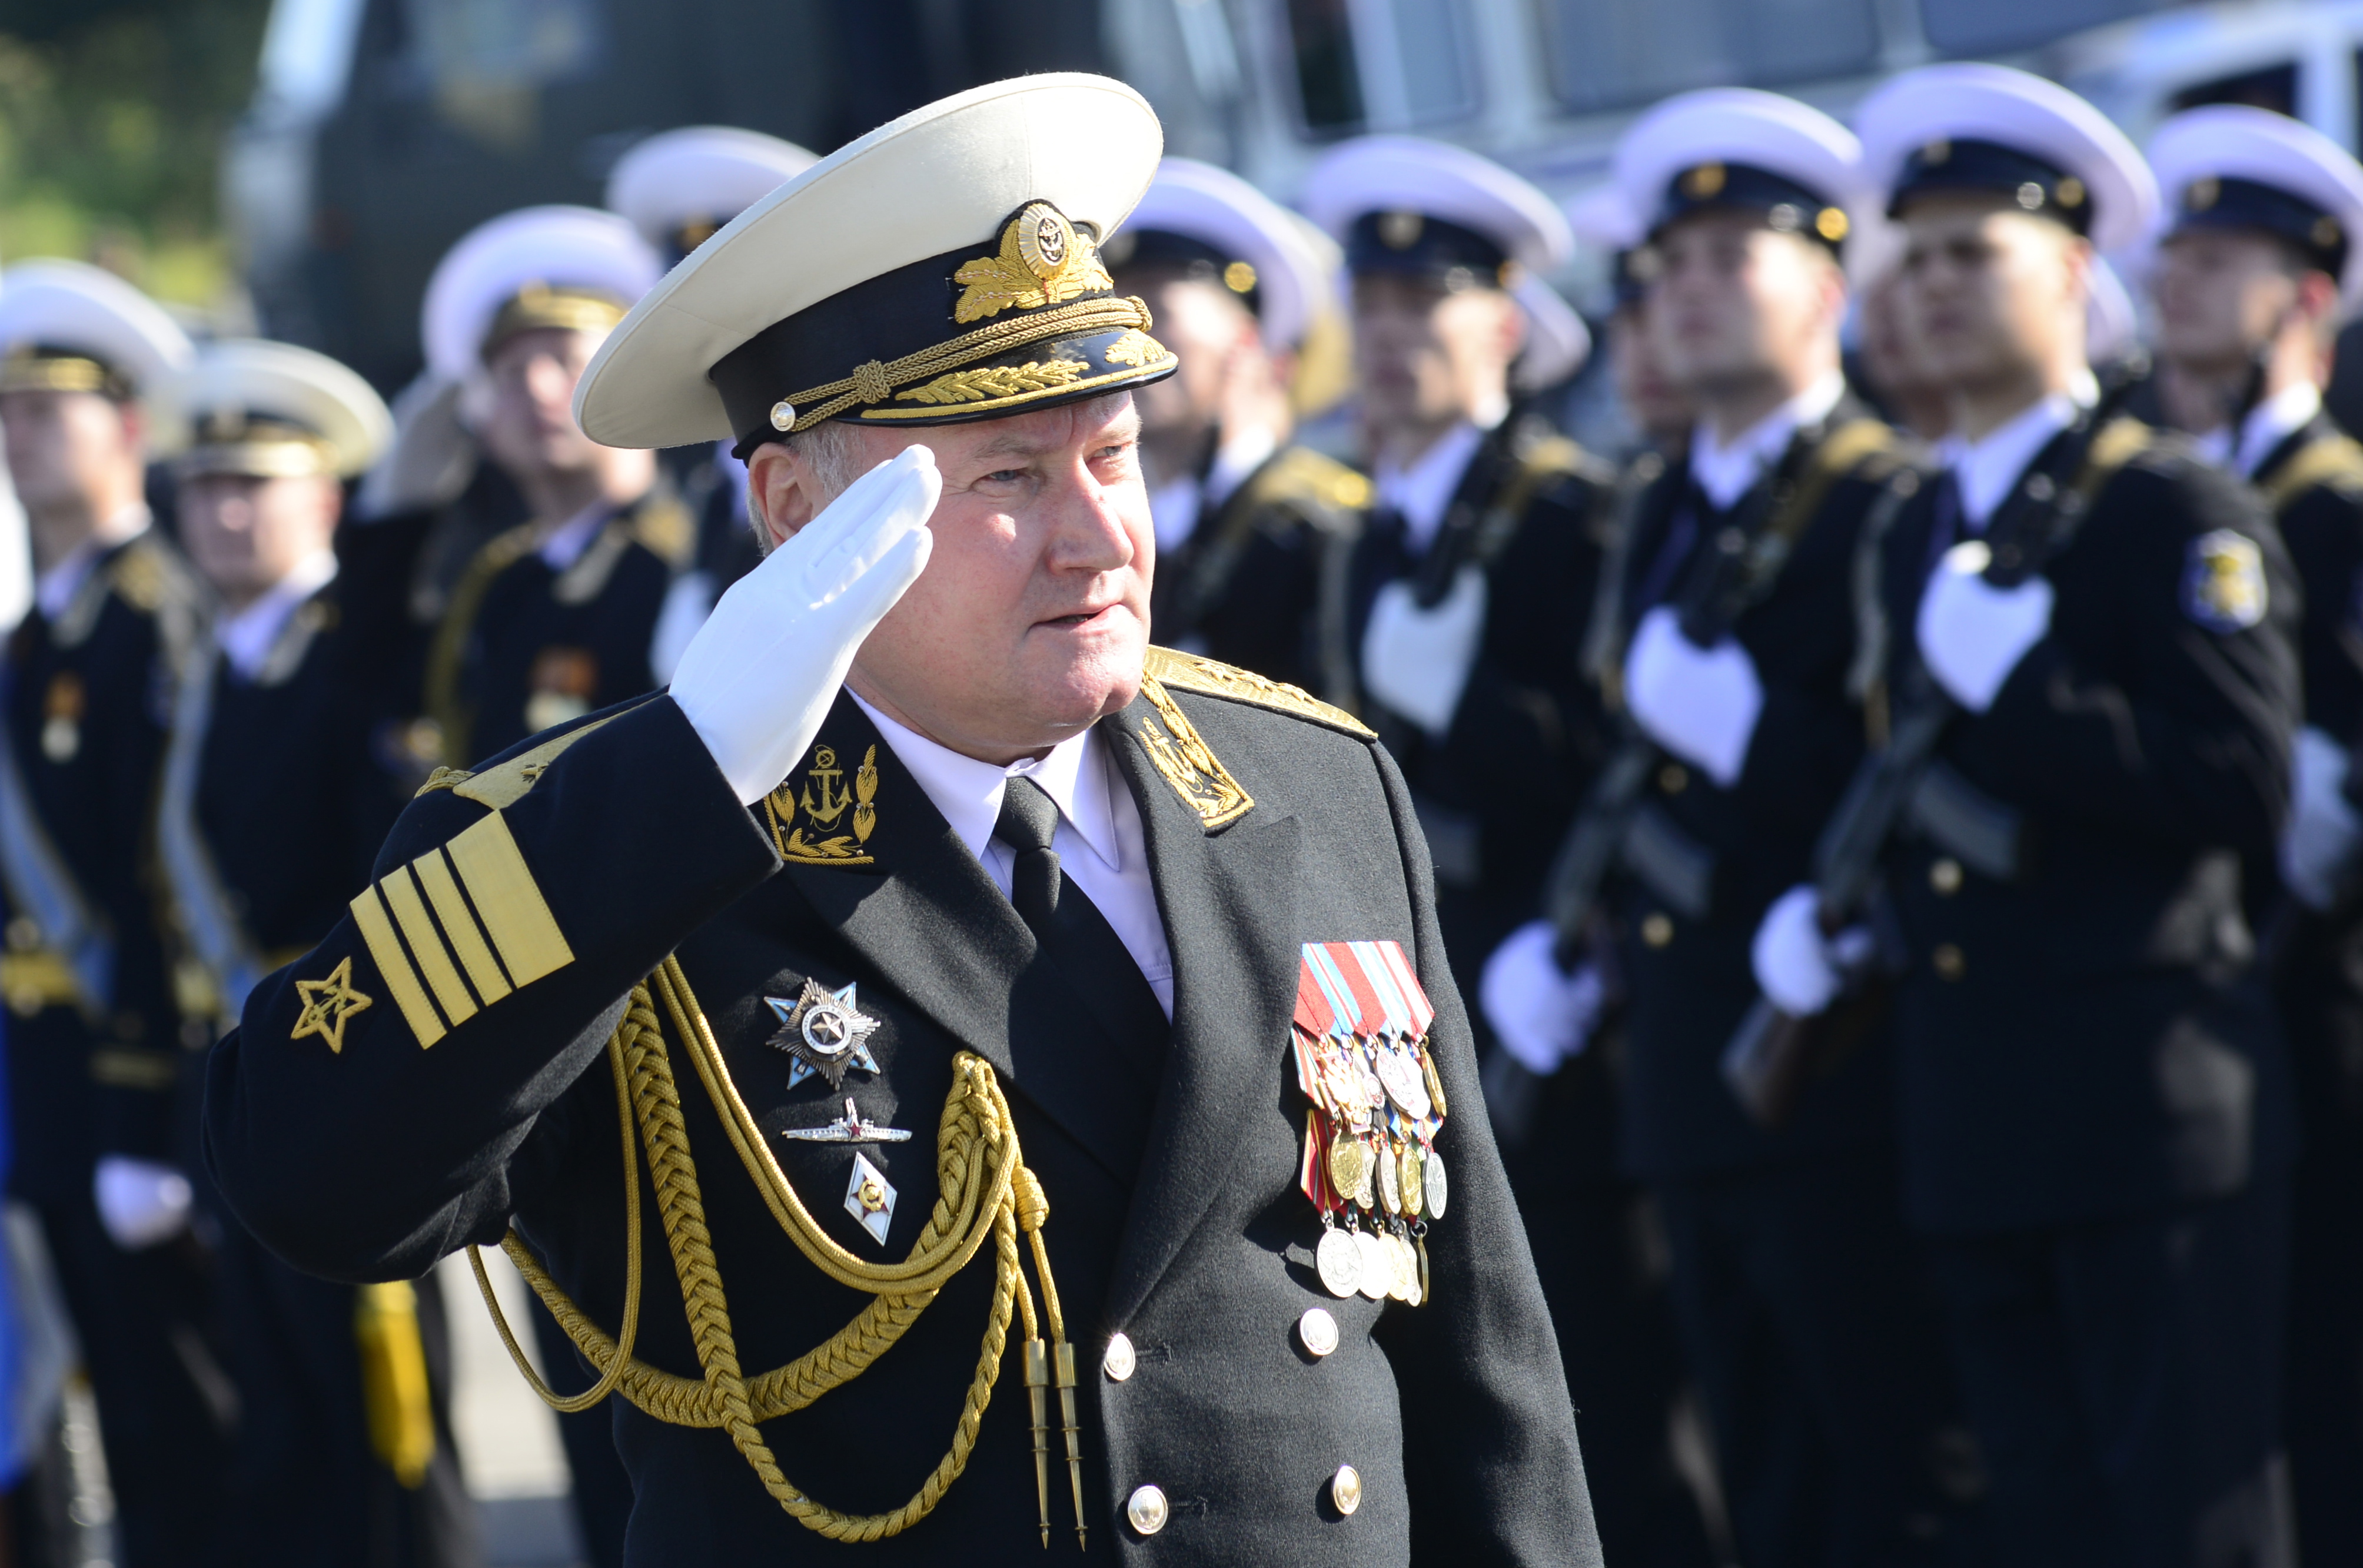 Admiral Vladimir Korolev, Commander-in-Chief of the Russian Navy. Source: Lev Fedoseev/TASS